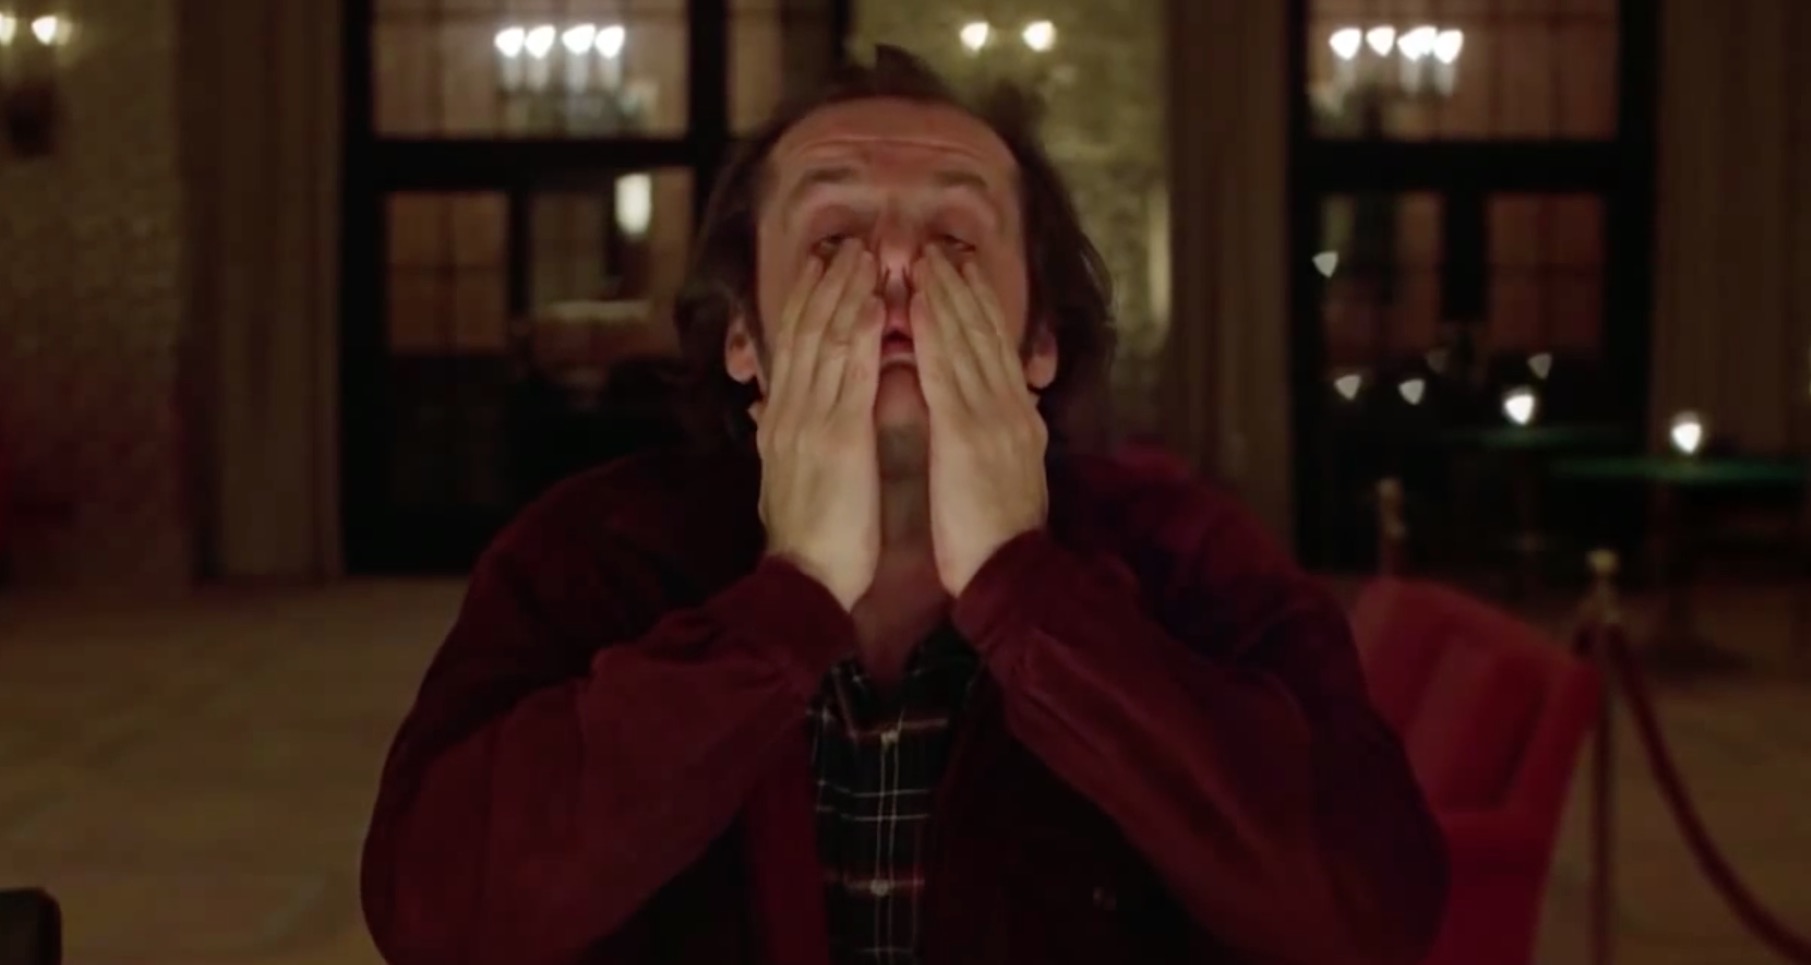 Stephen King Says Stanley Kubrick's 'The Shining' Is “Like A Big